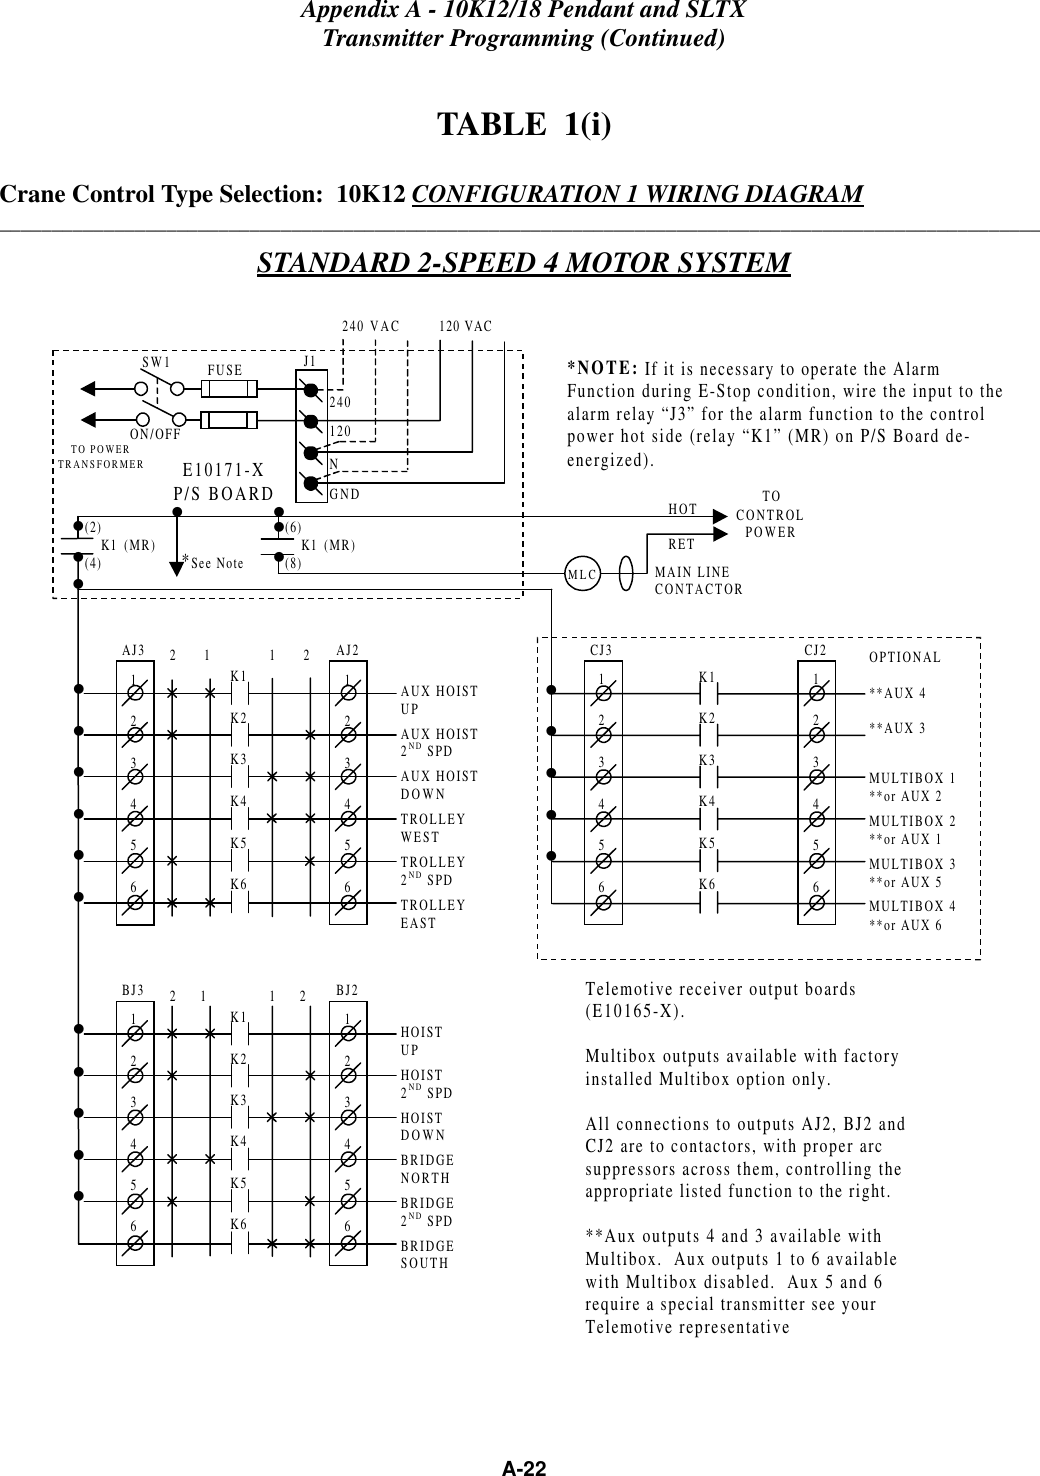 Appendix A - 10K12/18 Pendant and SLTXTransmitter Programming (Continued)A-22TABLE  1(i)Crane Control Type Selection:  10K12 CONFIGURATION 1 WIRING DIAGRAM____________________________________________________________________________________________________STANDARD 2-SPEED 4 MOTOR SYSTEMBJ3123456BJ2123456K1K2K3K4K5K62      1 1      2HOISTUPHOIST2ND SPDHOISTDOWNBRIDGENORTHBRIDGE2ND SPDBRIDGESOUTH•••••*NOTE: If it is necessary to operate the AlarmFunction during E-Stop condition, wire the input to thealarm relay “J3” for the alarm function to the controlpower hot side (relay “K1” (MR) on P/S Board de-energized).Telemotive receiver output boards(E10165-X).Multibox outputs available with factoryinstalled Multibox option only.All connections to outputs AJ2, BJ2 andCJ2 are to contactors, with proper arcsuppressors across them, controlling theappropriate listed function to the right.**Aux outputs 4 and 3 available withMultibox.  Aux outputs 1 to 6 availablewith Multibox disabled.  Aux 5 and 6require a special transmitter see yourTelemotive representative240 VAC          120 VACSW1ON/OFFTO POWERTRANSFORMERE10171-XP/S BOARDMAIN LINECONTACTORTOCONTROLPOWERHOTRET(2)    K1 (MR)(4)•••*See Note•240120FUSE J1NGND(6)    K1 (MR)(8)•••AJ3123456AJ21234562       1 1       2AUX HOISTUPAUX HOIST2ND SPDAUX HOISTDOWNTROLLEYWESTTROLLEY2ND SPDTROLLEYEAST••••••CJ3123456CJ2123456K1K2K3K4K5K6OPTIONAL**AUX 4**AUX 3MULTIBOX 1**or AUX 2MULTIBOX 2**or AUX 1MULTIBOX 3**or AUX 5MULTIBOX 4**or AUX 6•••••K1K2K3K4K5K6MLC